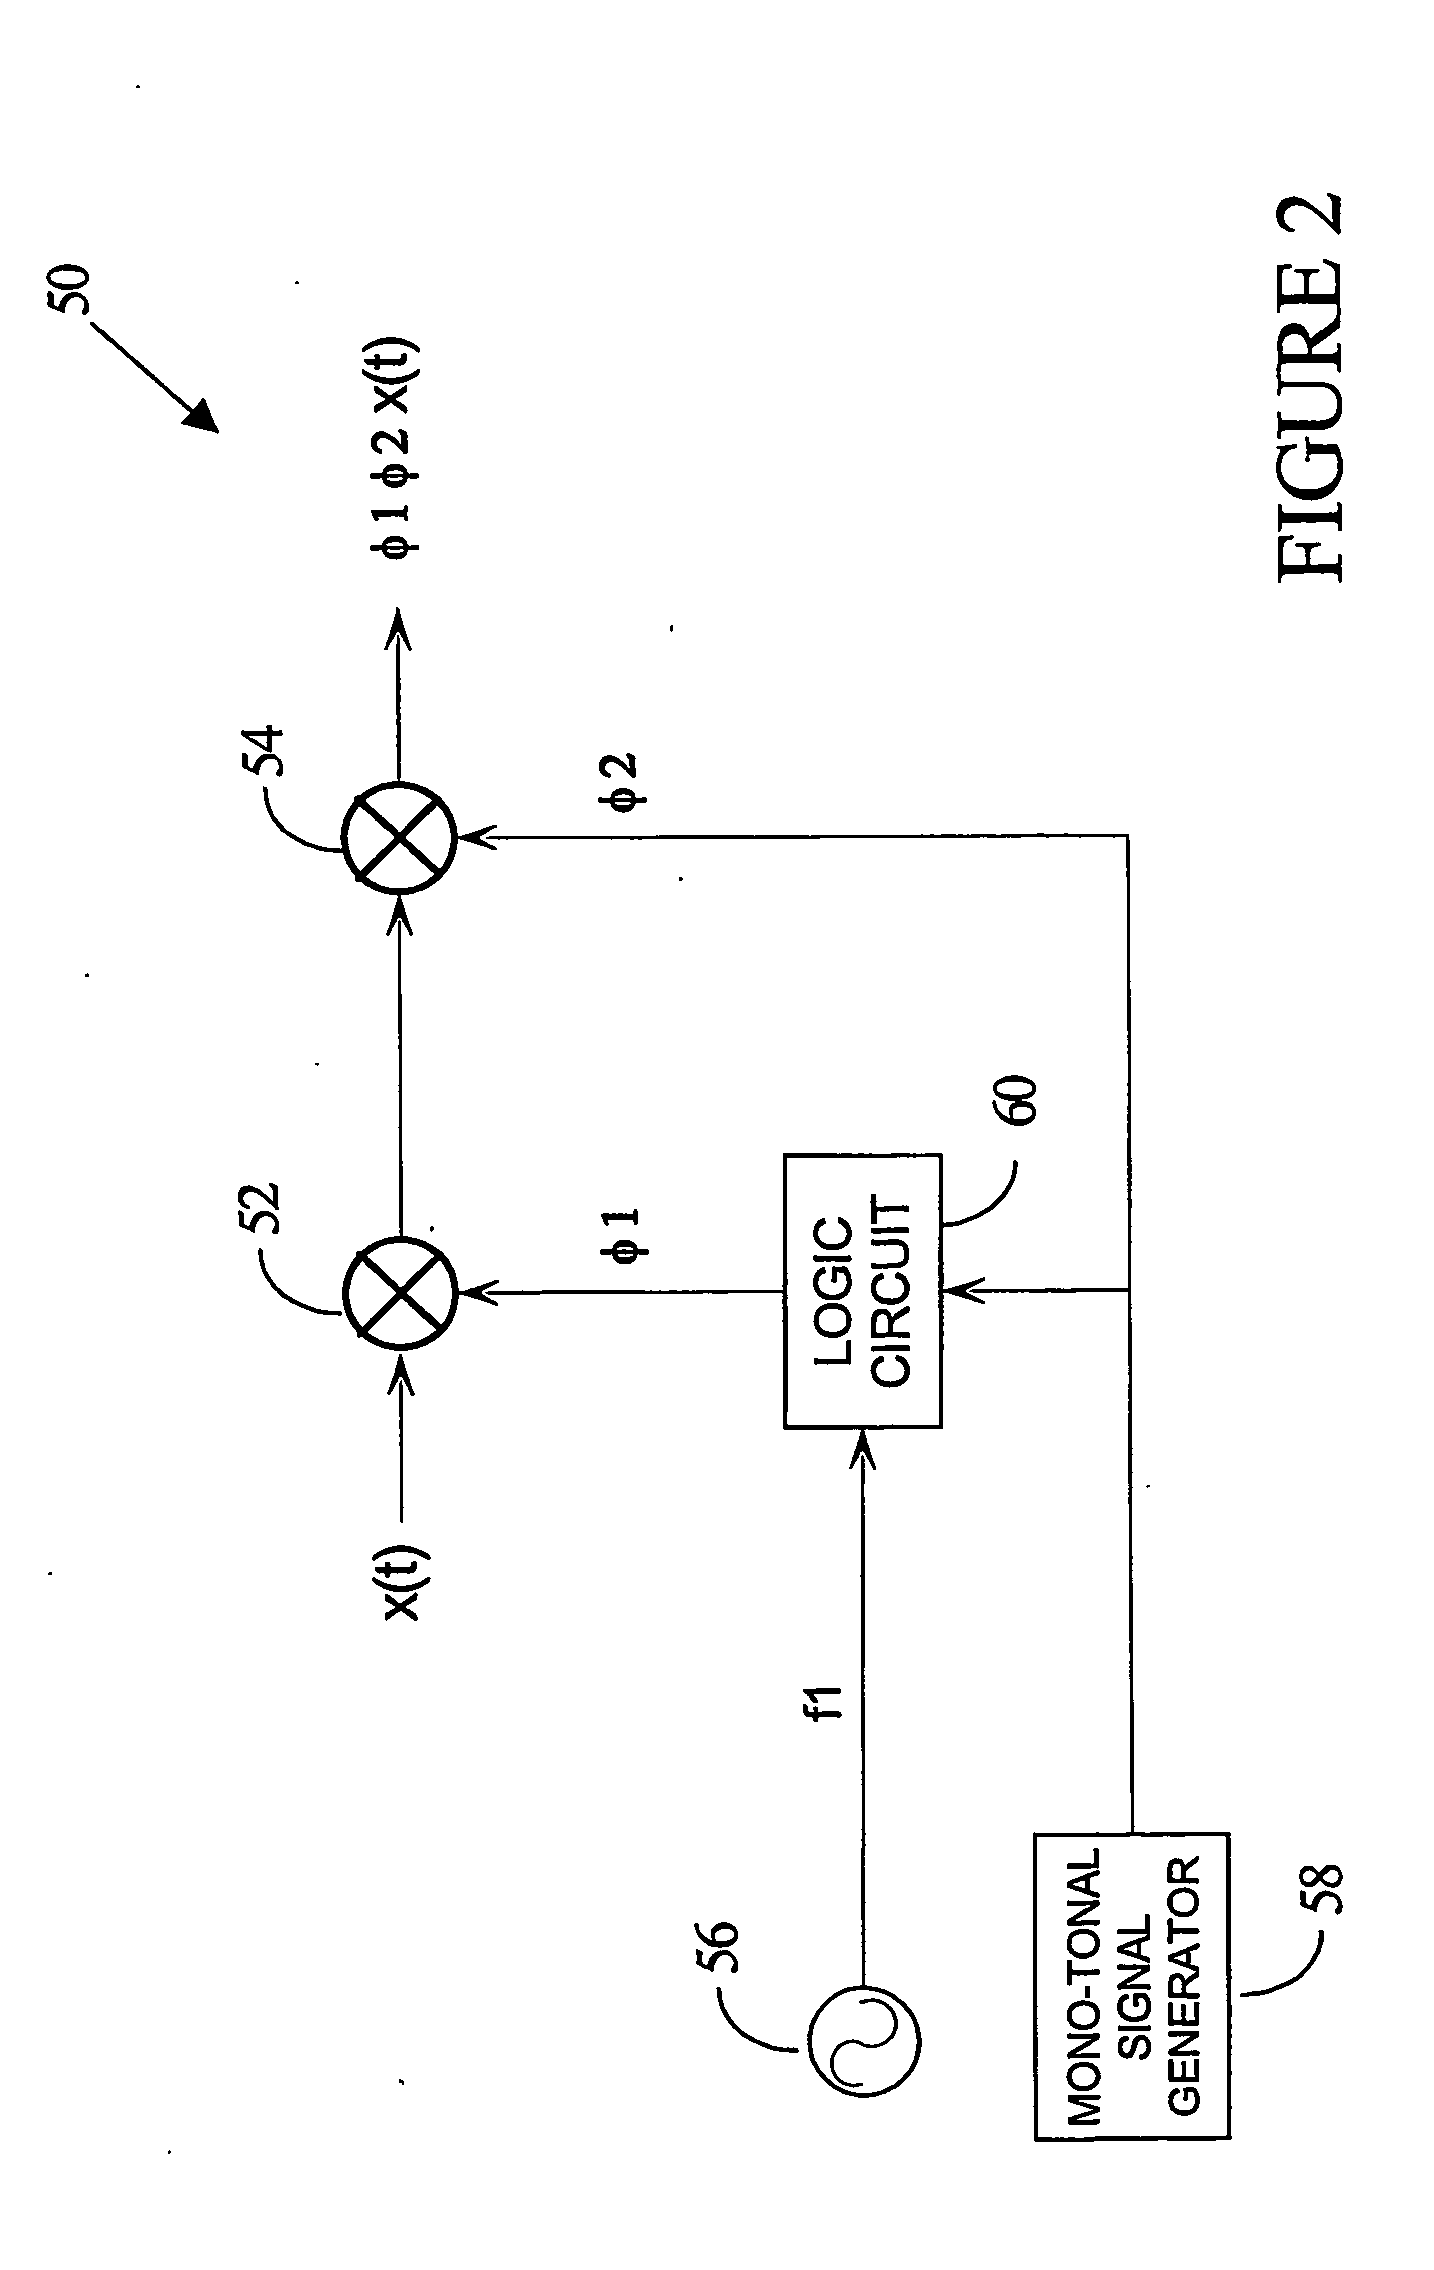 Method and apparatus for down conversion of radio frequency (rf) signals